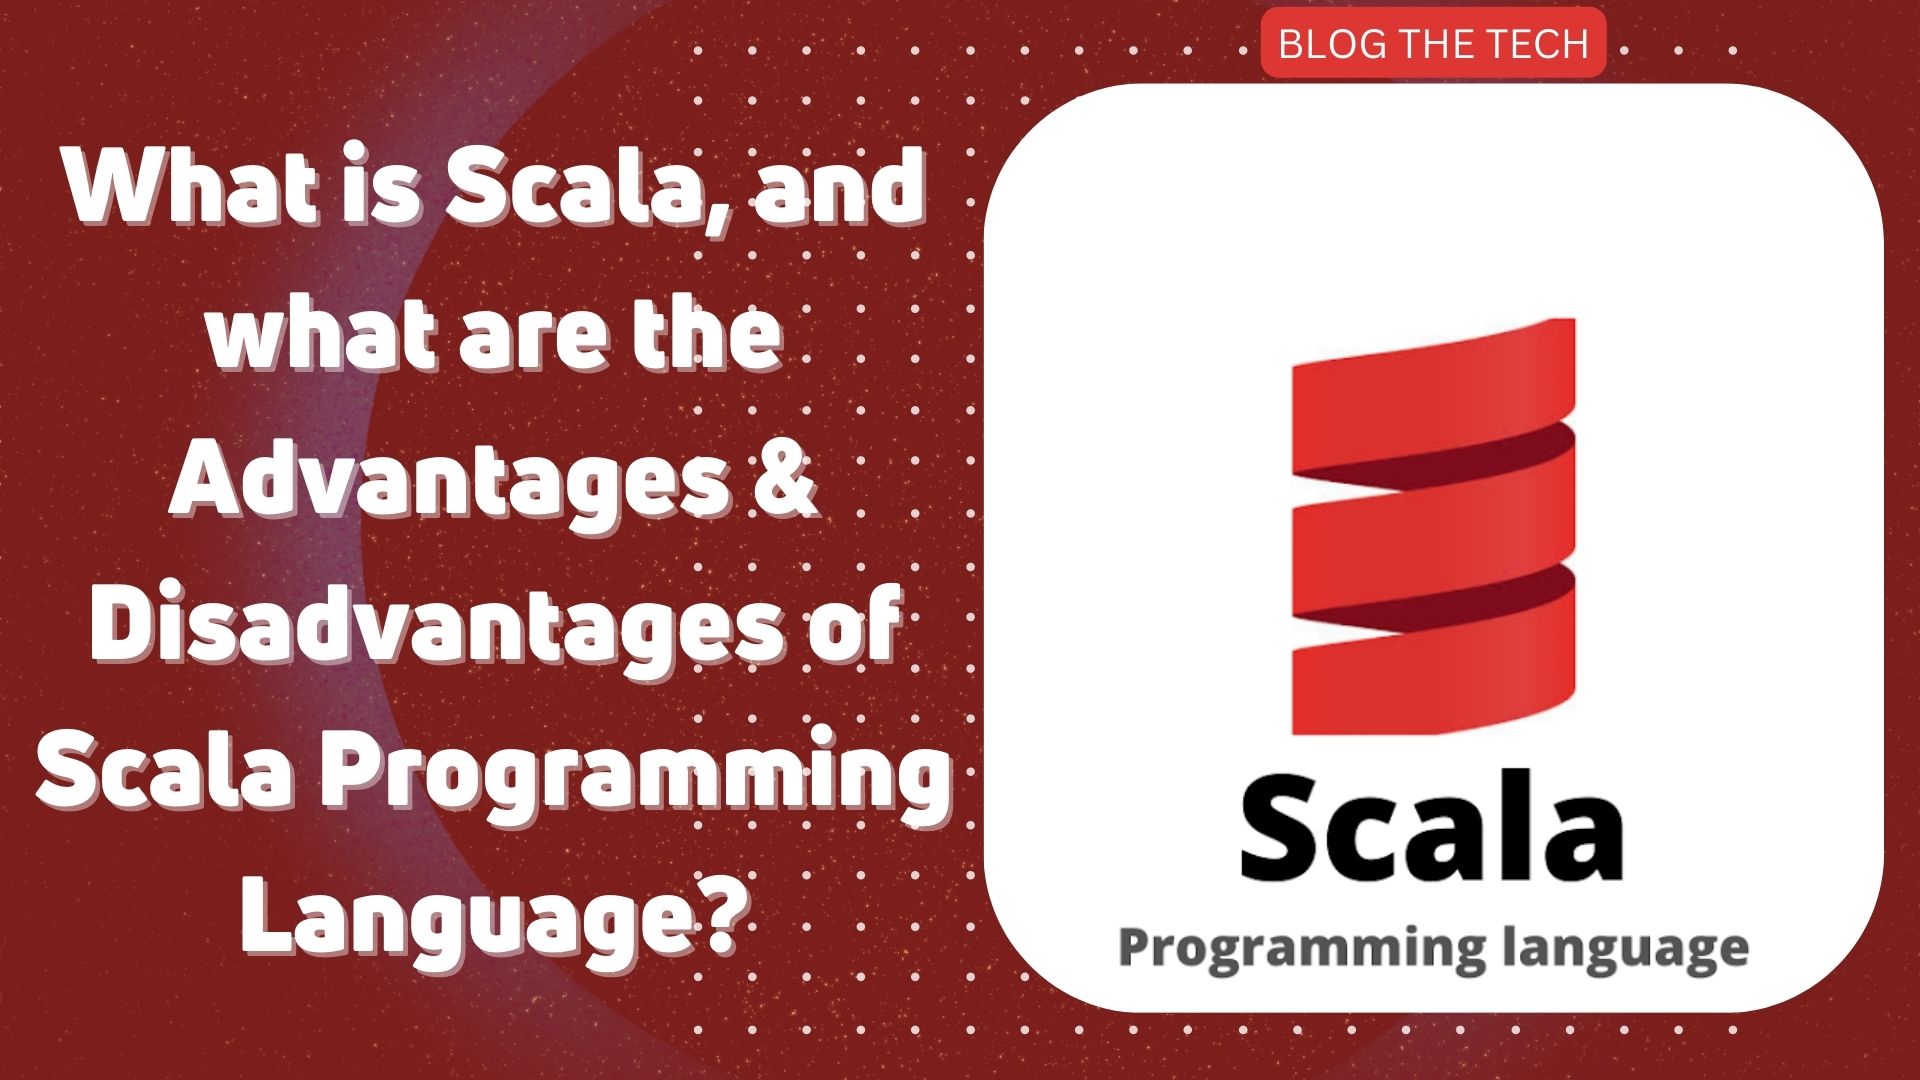 What is Scala, and what are the Advantages & Disadvantages of Scala Programming Language?